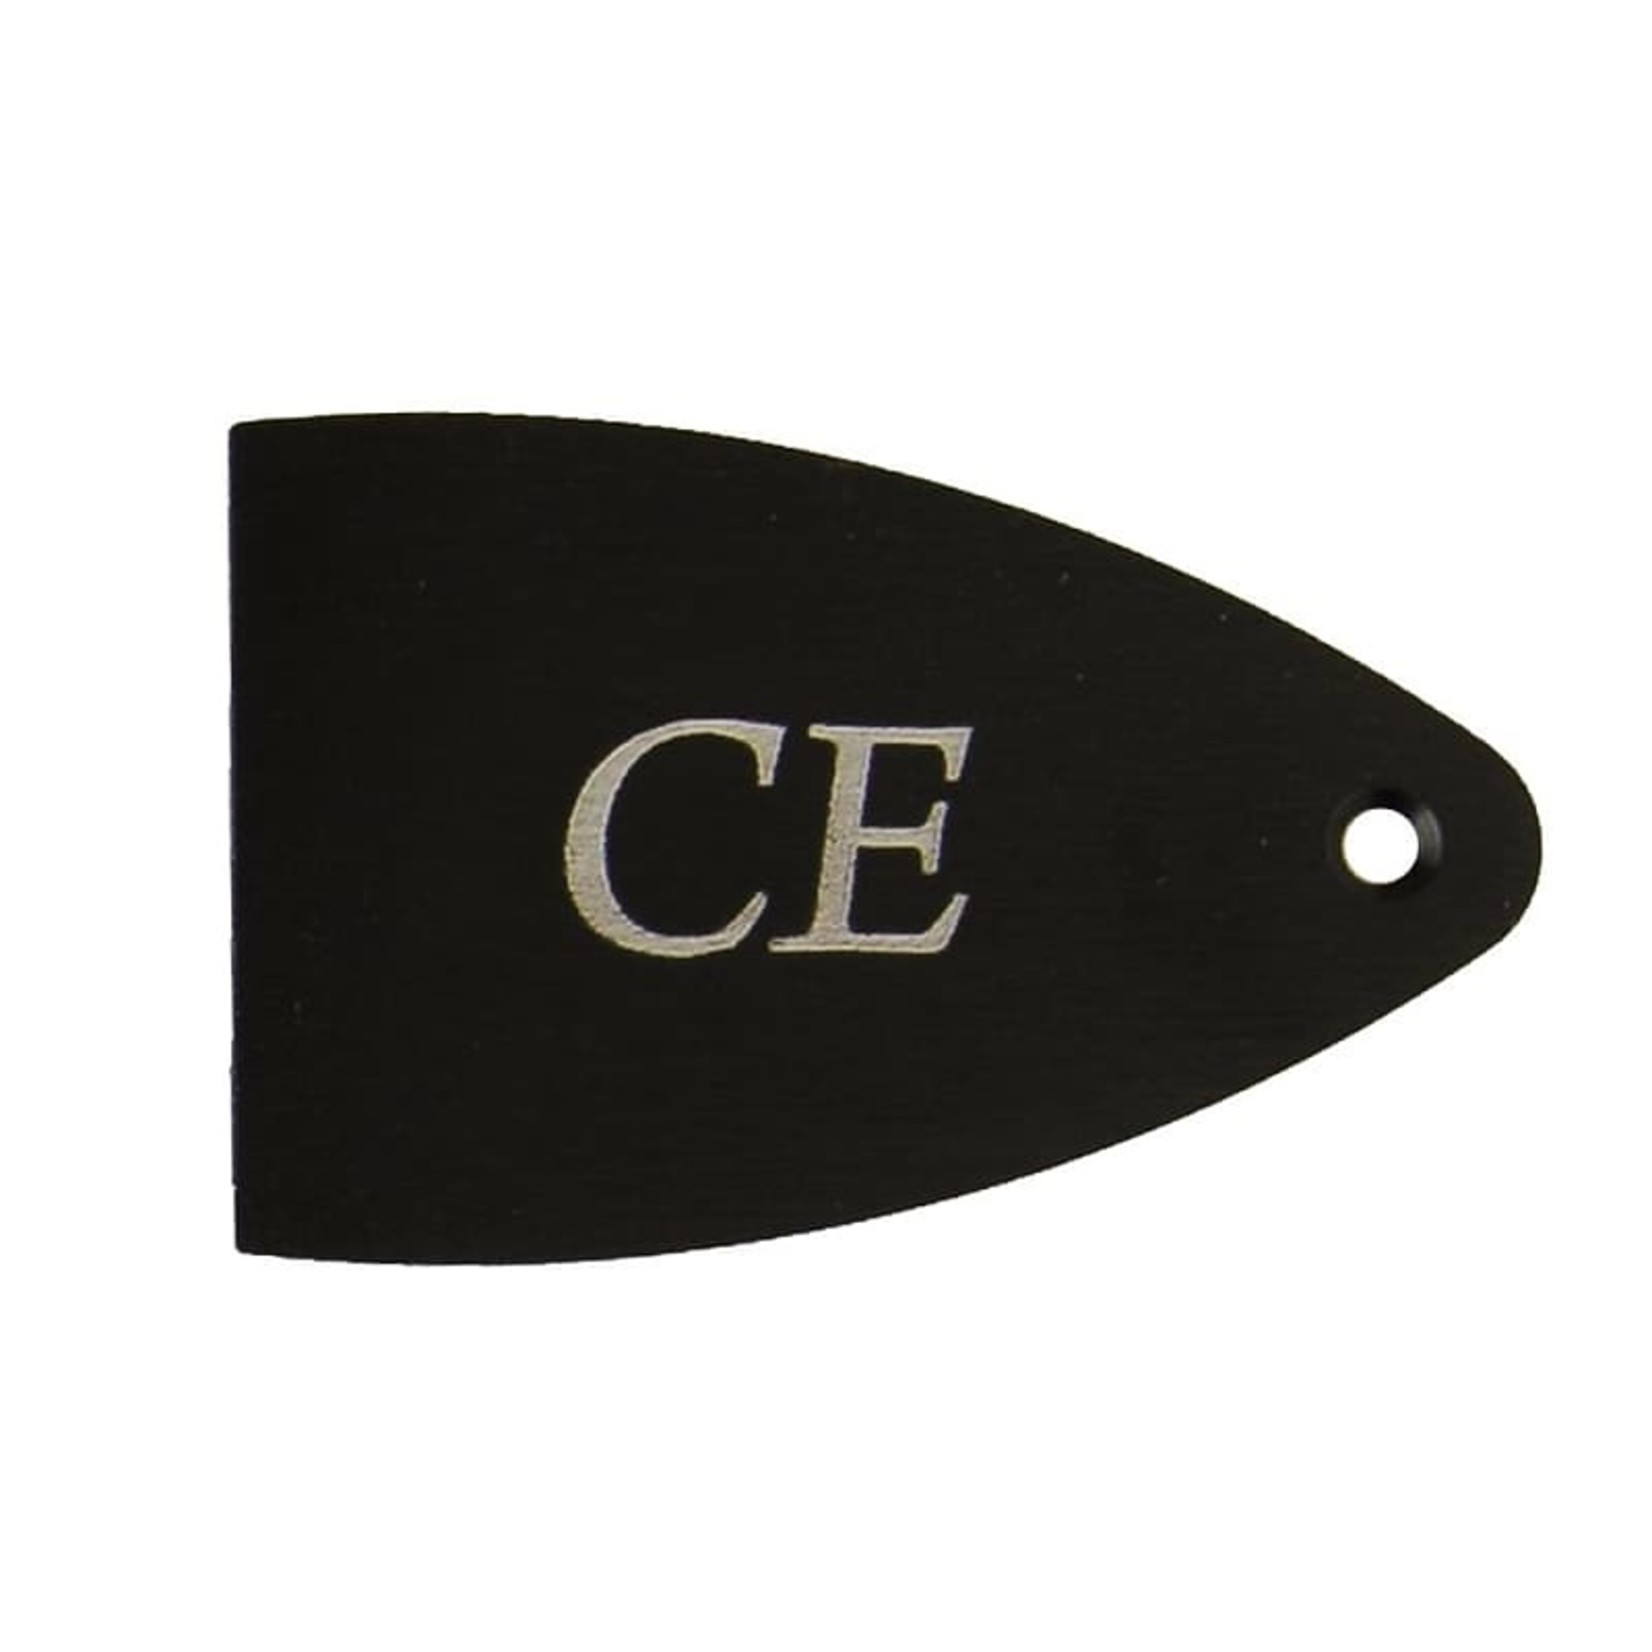 Paul Reed Smith Paul Reed Smith Core, Black Anodized Aluminum, Etched Truss Rod Cover - CE